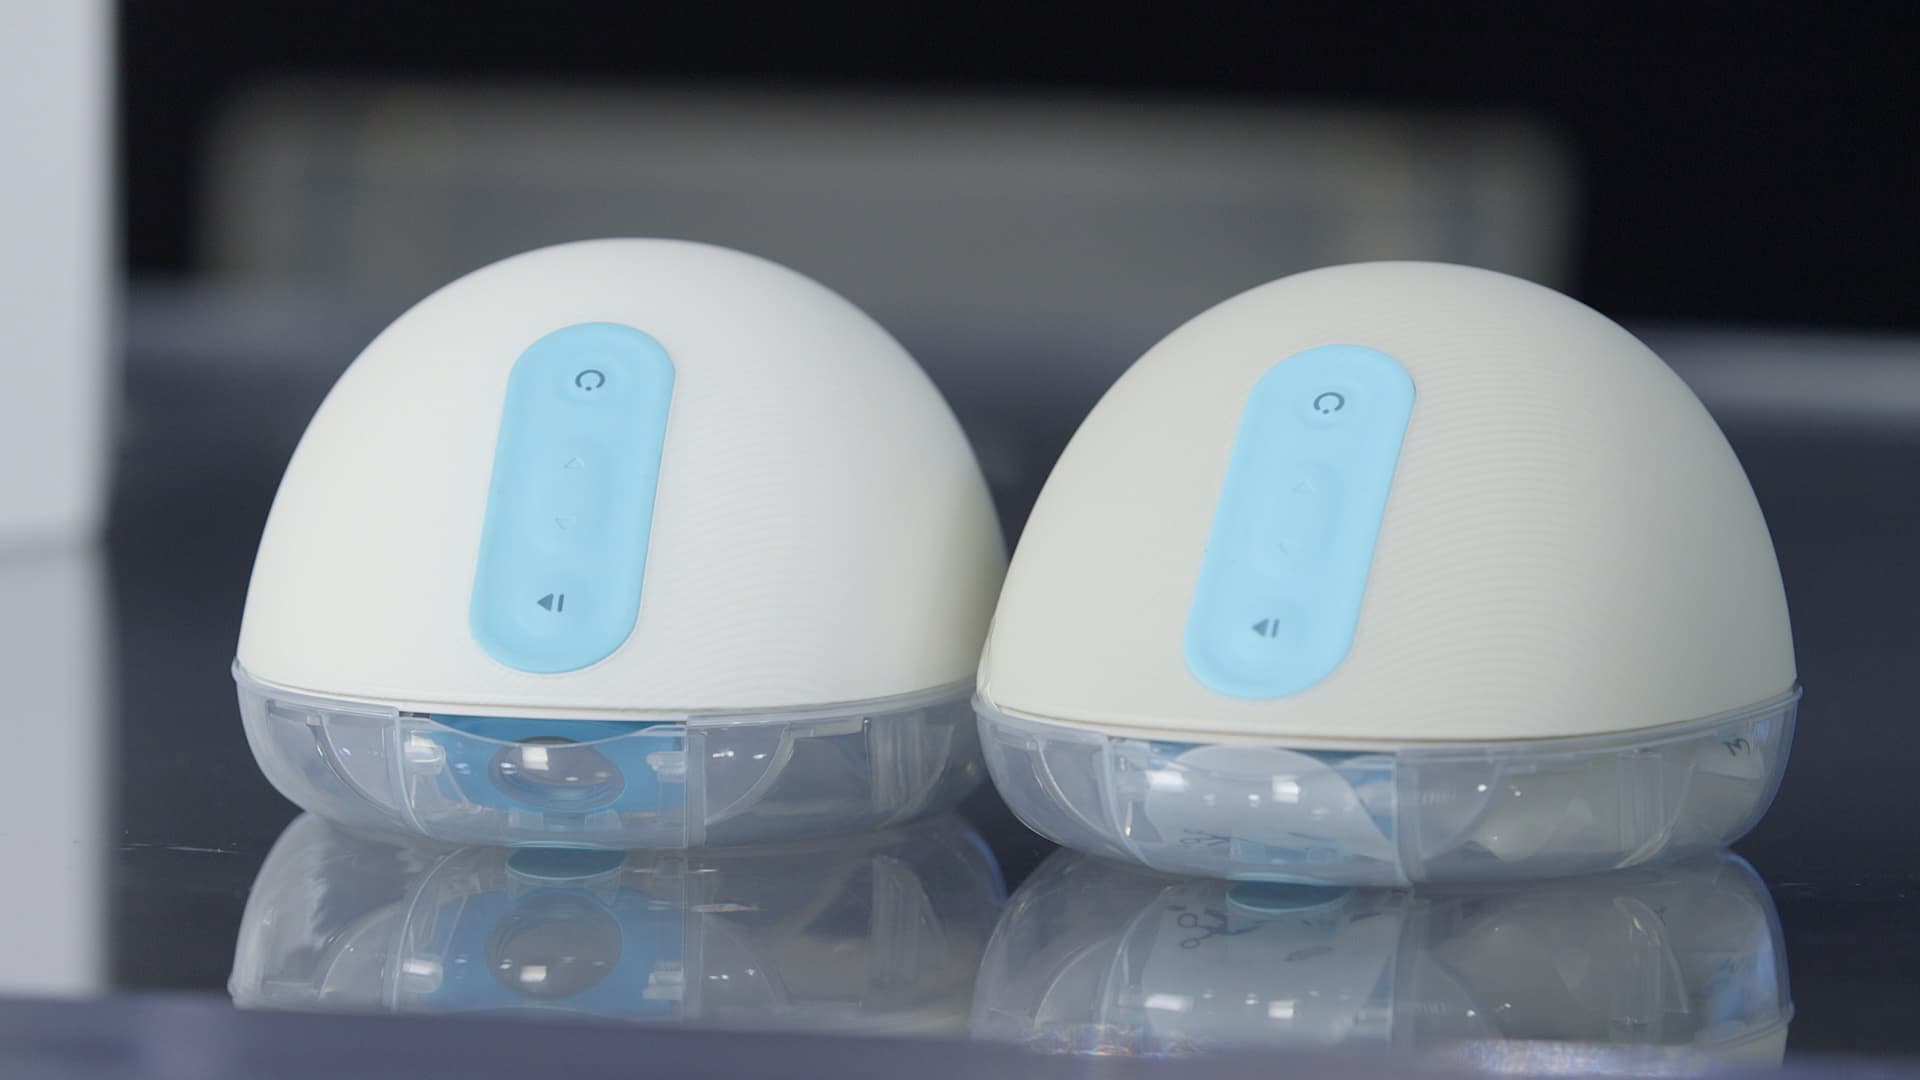 Willow breast pump 2.0 first look